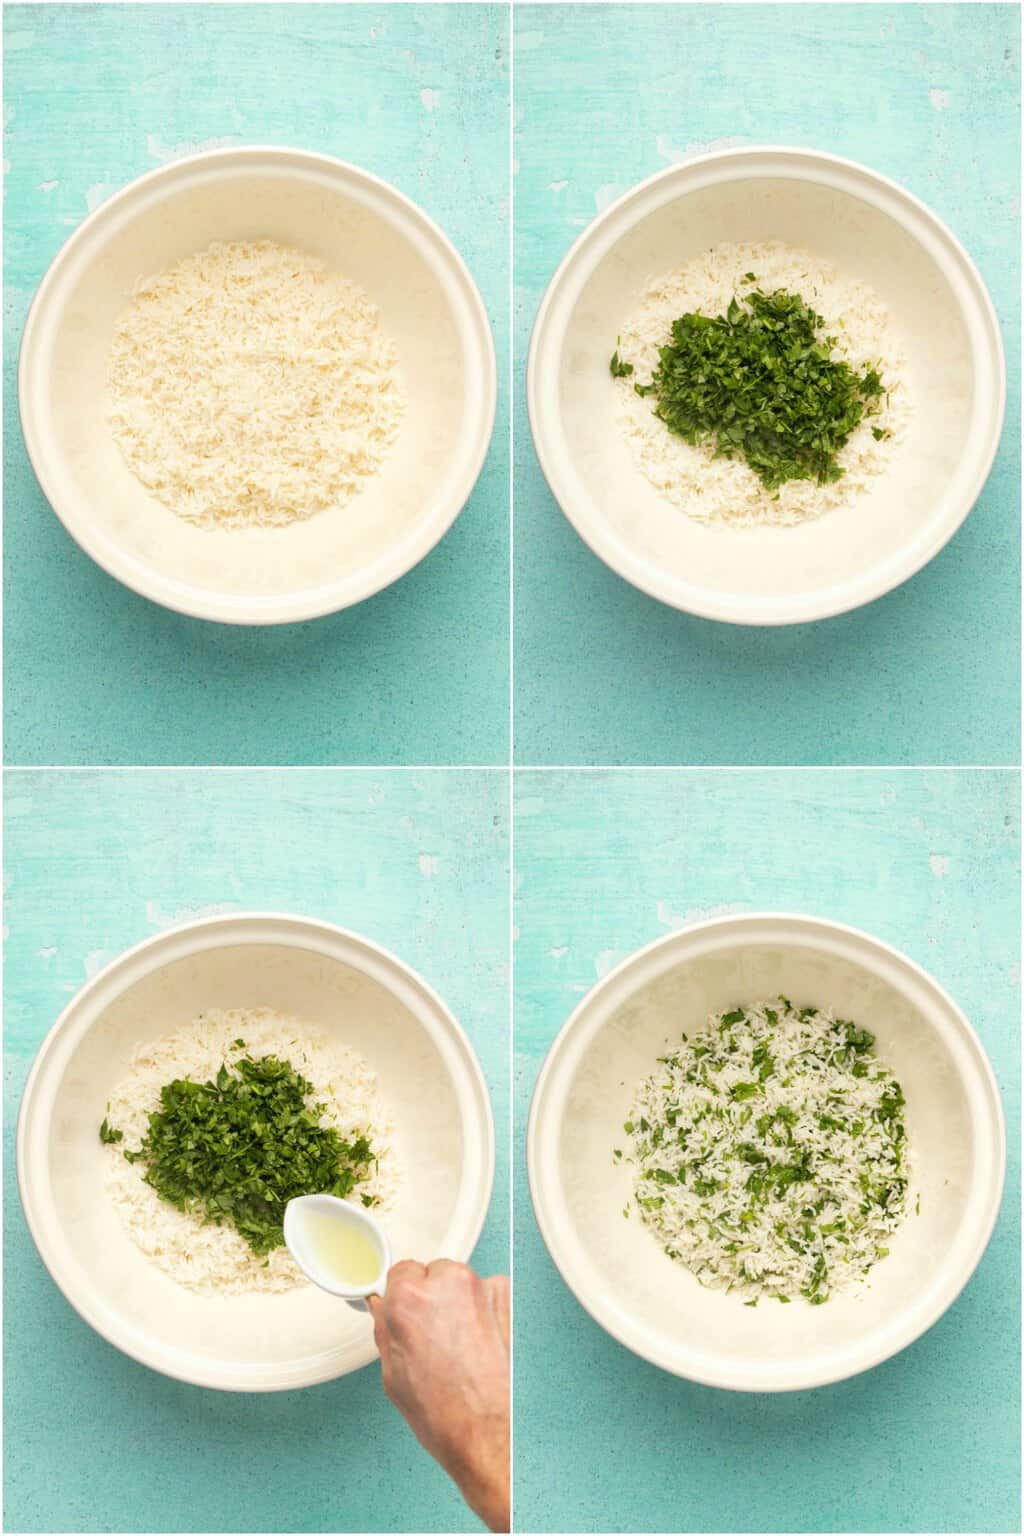 Step by step process photo collage of making cilantro lime rice for vegan burrito bowls.